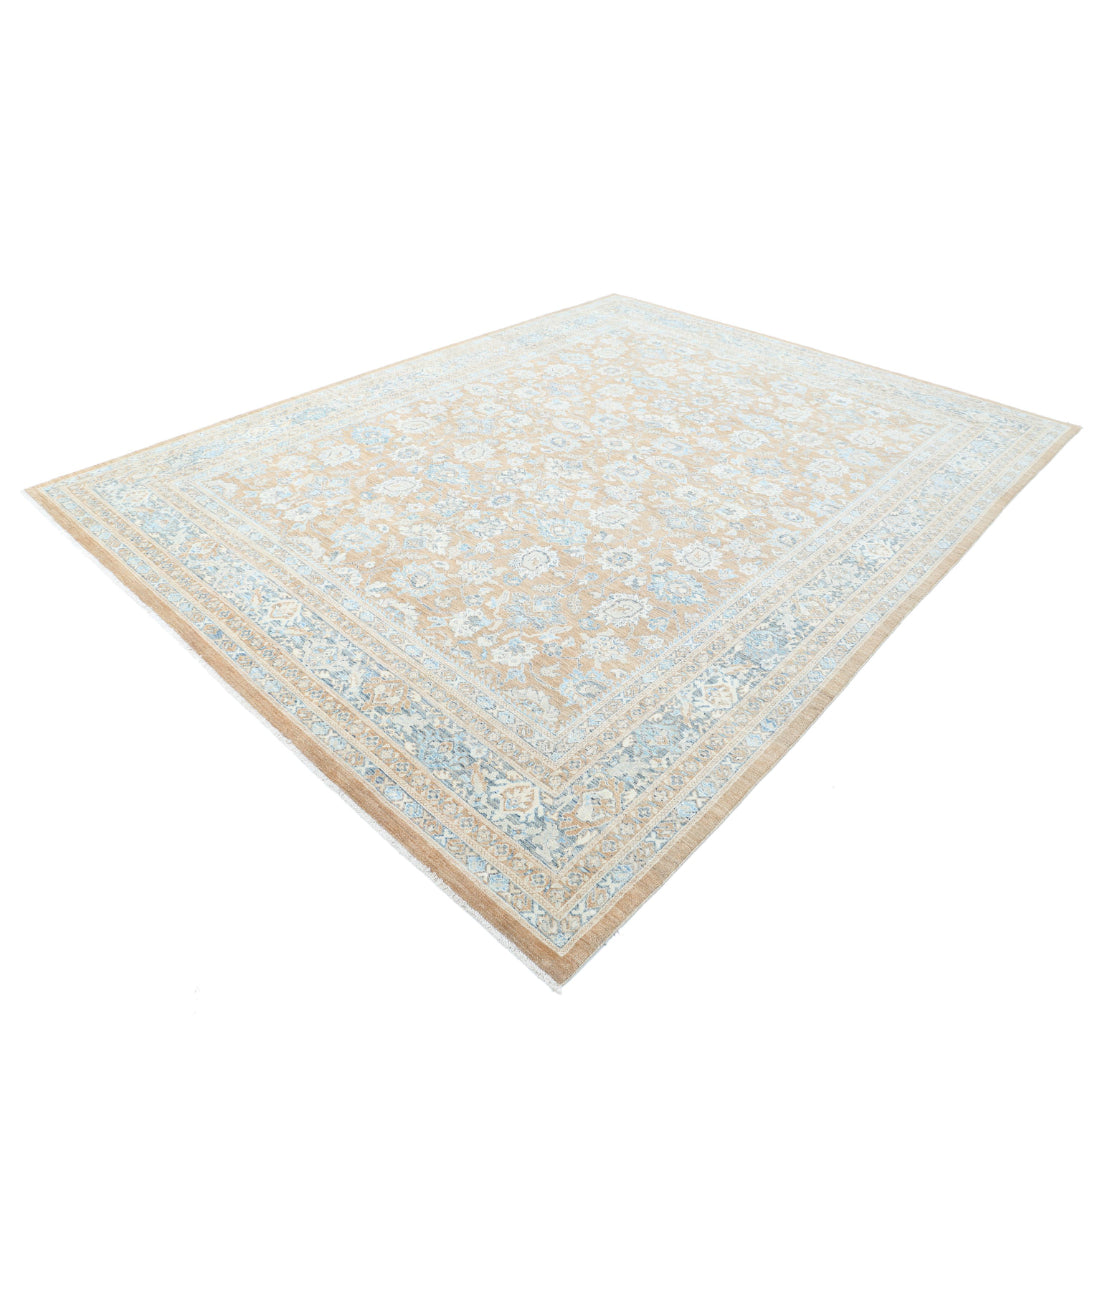 Serenity 8'8'' X 11'7'' Hand-Knotted Wool Rug 8'8'' x 11'7'' (260 X 348) / Brown / Blue